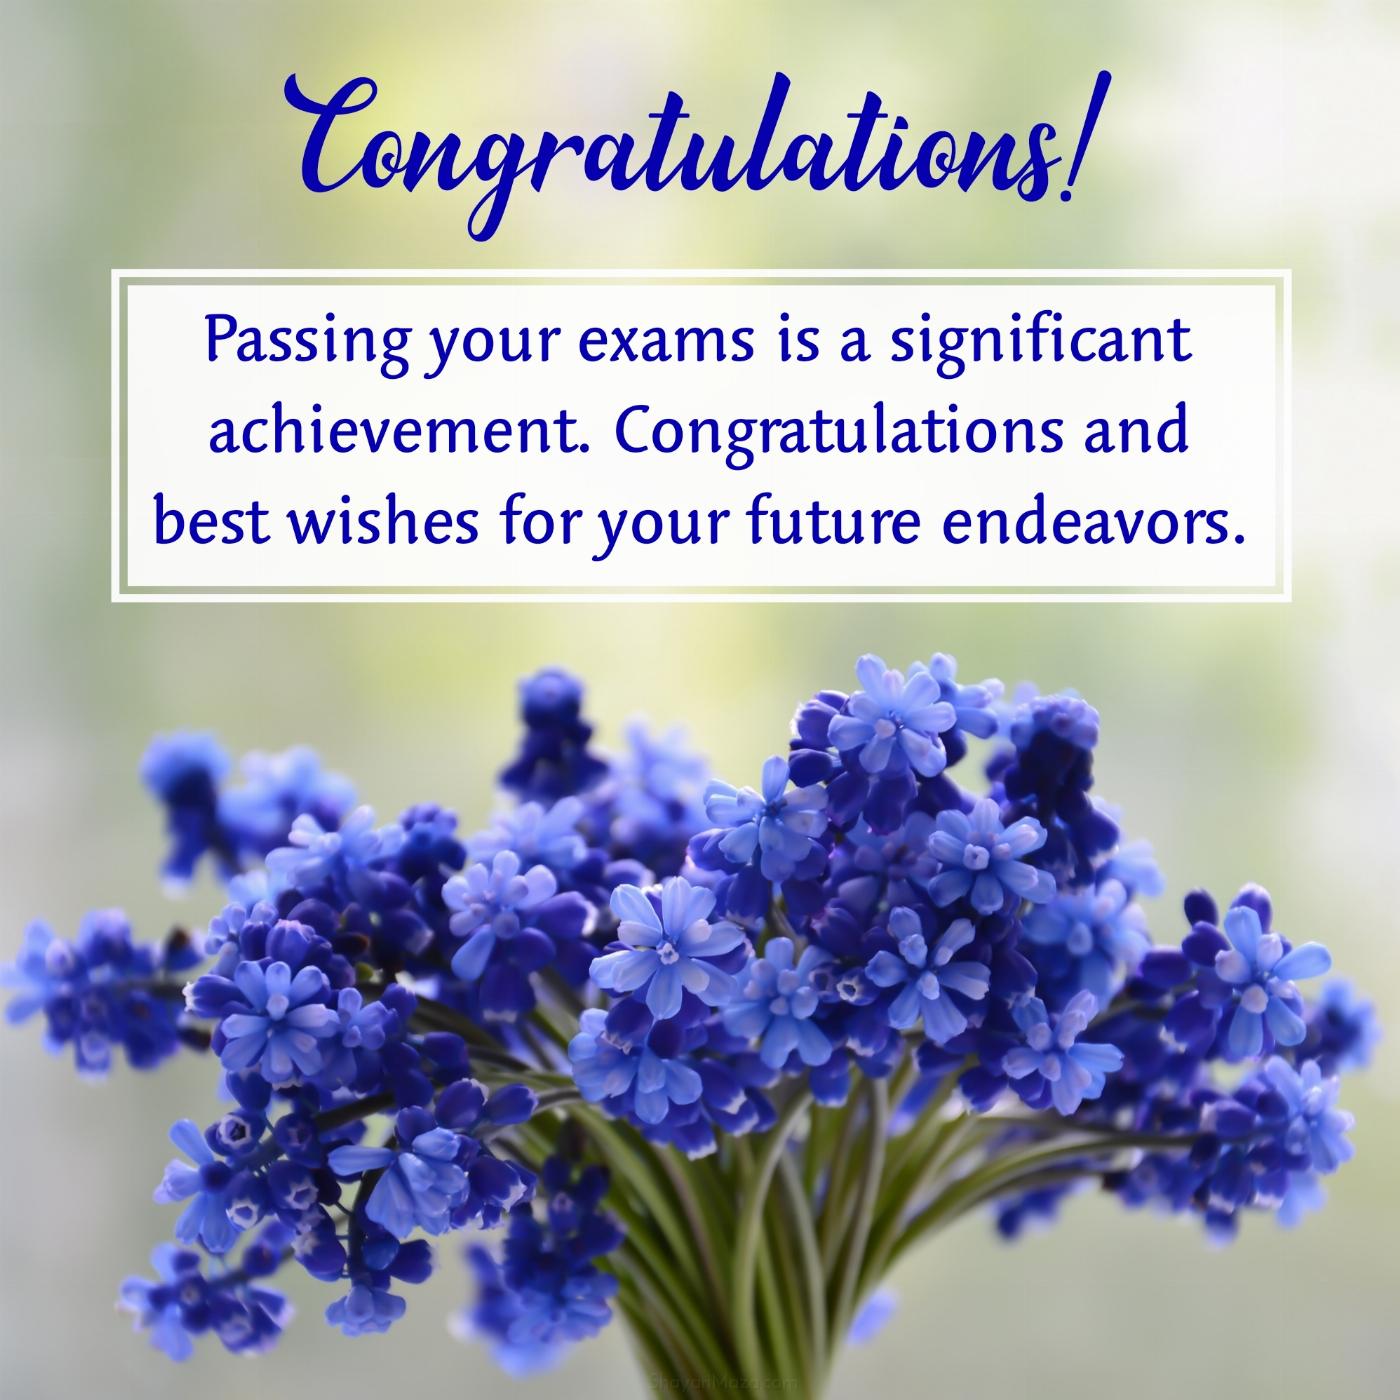 Passing your exams is a significant achievement